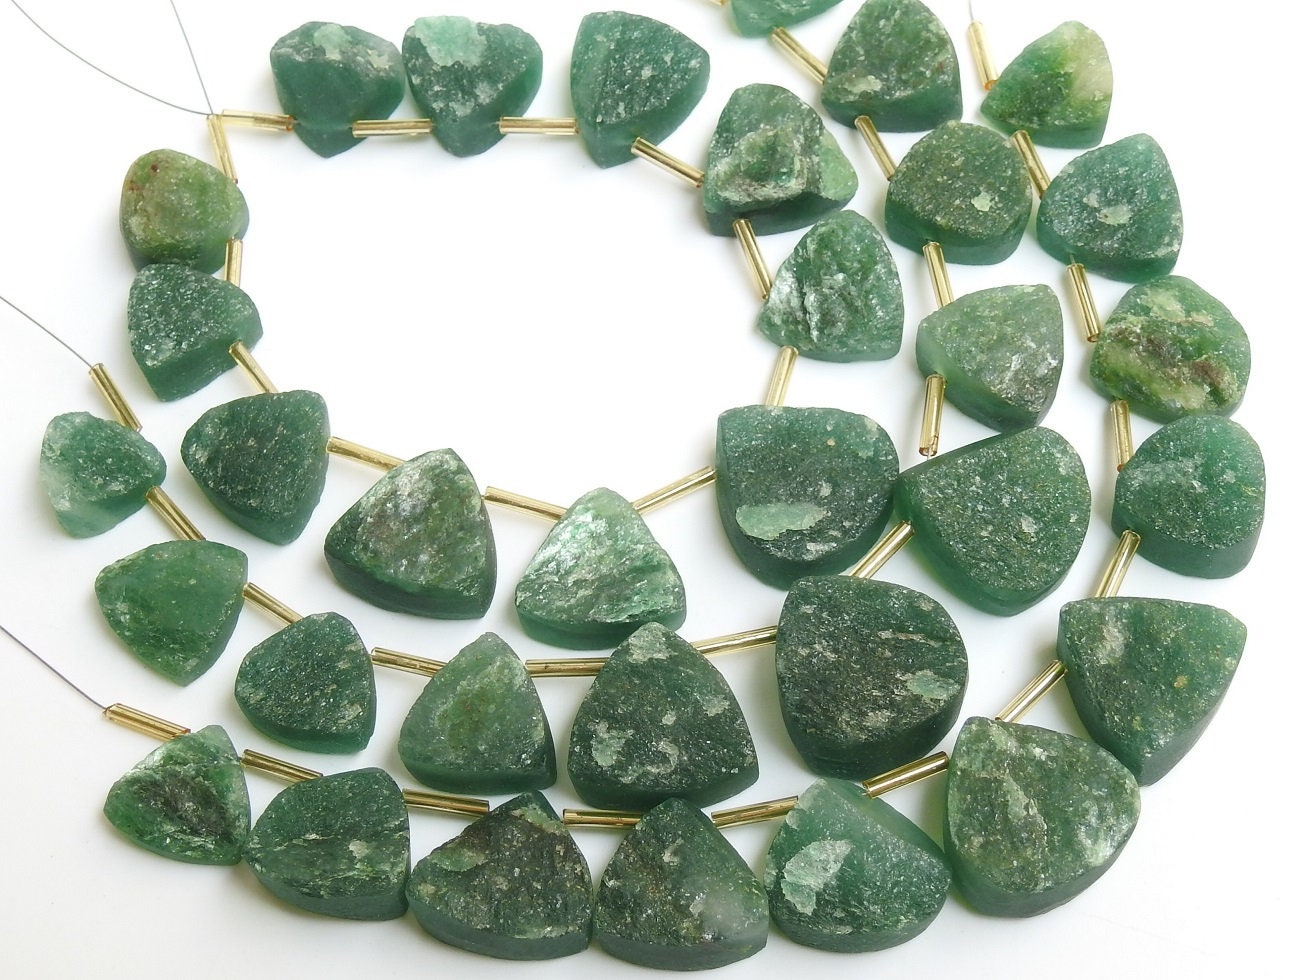 Natural Green Aventurine Druzy,Loose Rough,Raw Stone,Triangle Shape,11Piece Strand 20X20To13X13 MM Approx,Wholesaler,Supplies PME-R6 | Save 33% - Rajasthan Living 12